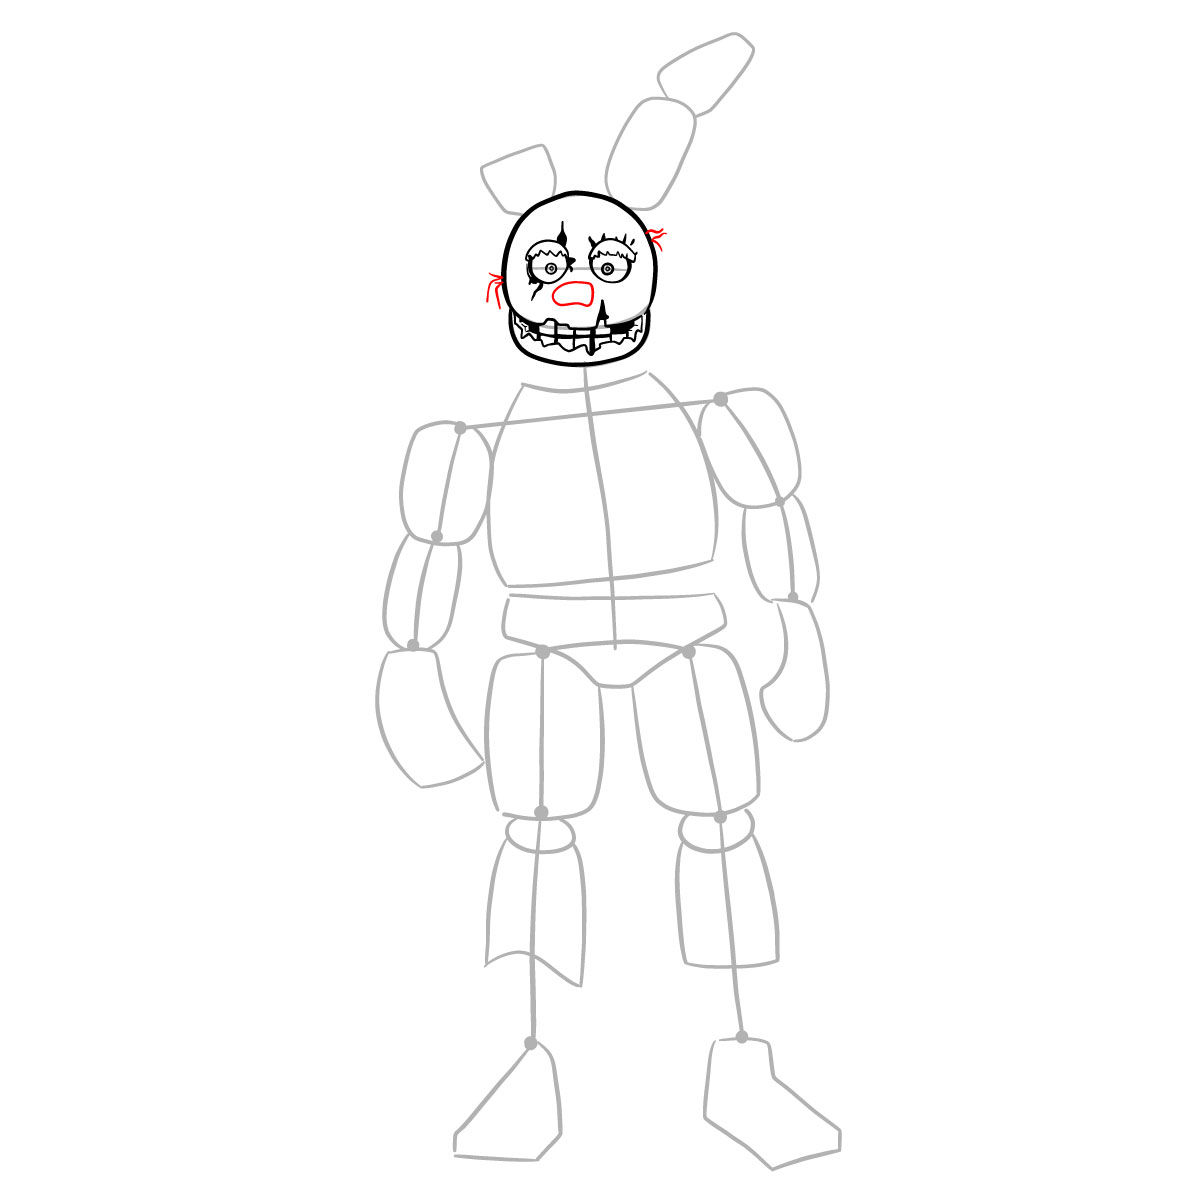 How to draw Springtrap from FNAF 3 - step 12